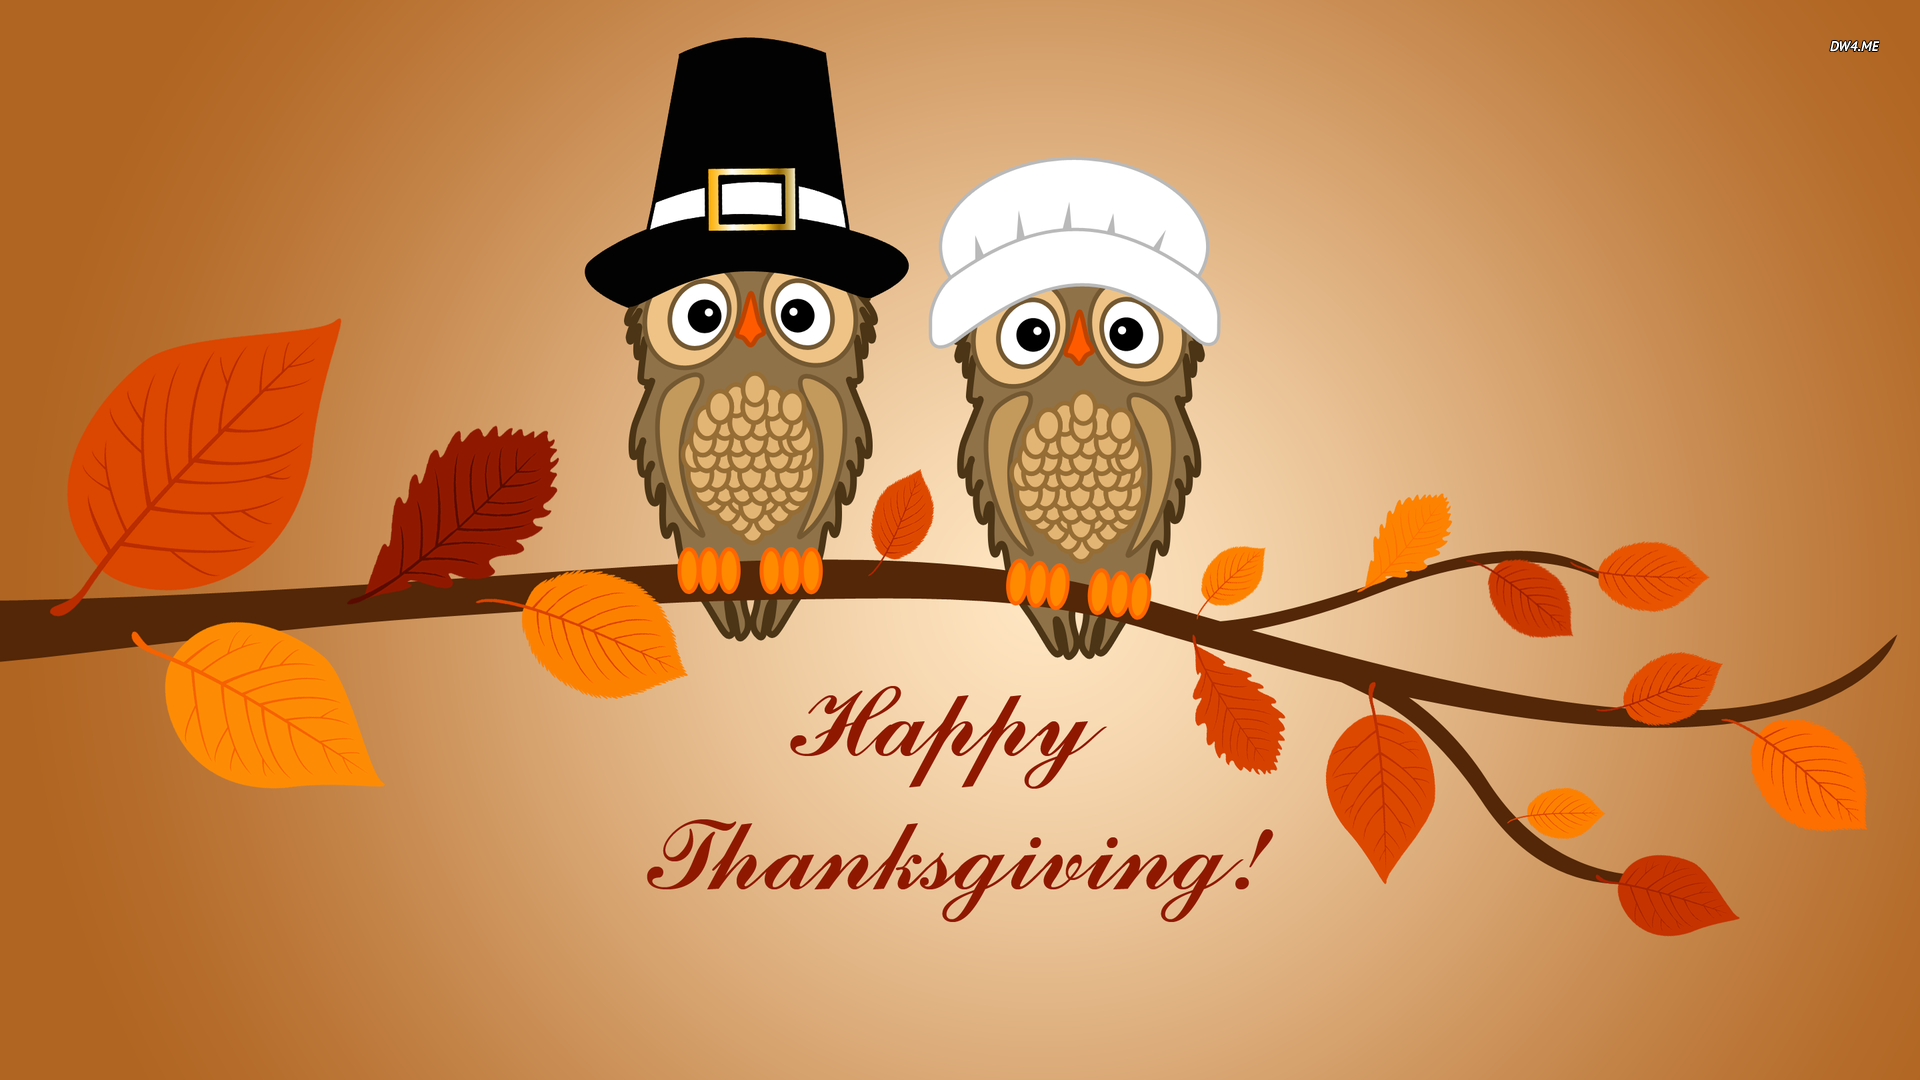 Happy Thanksgiving from McGuire Wood & Bissette!